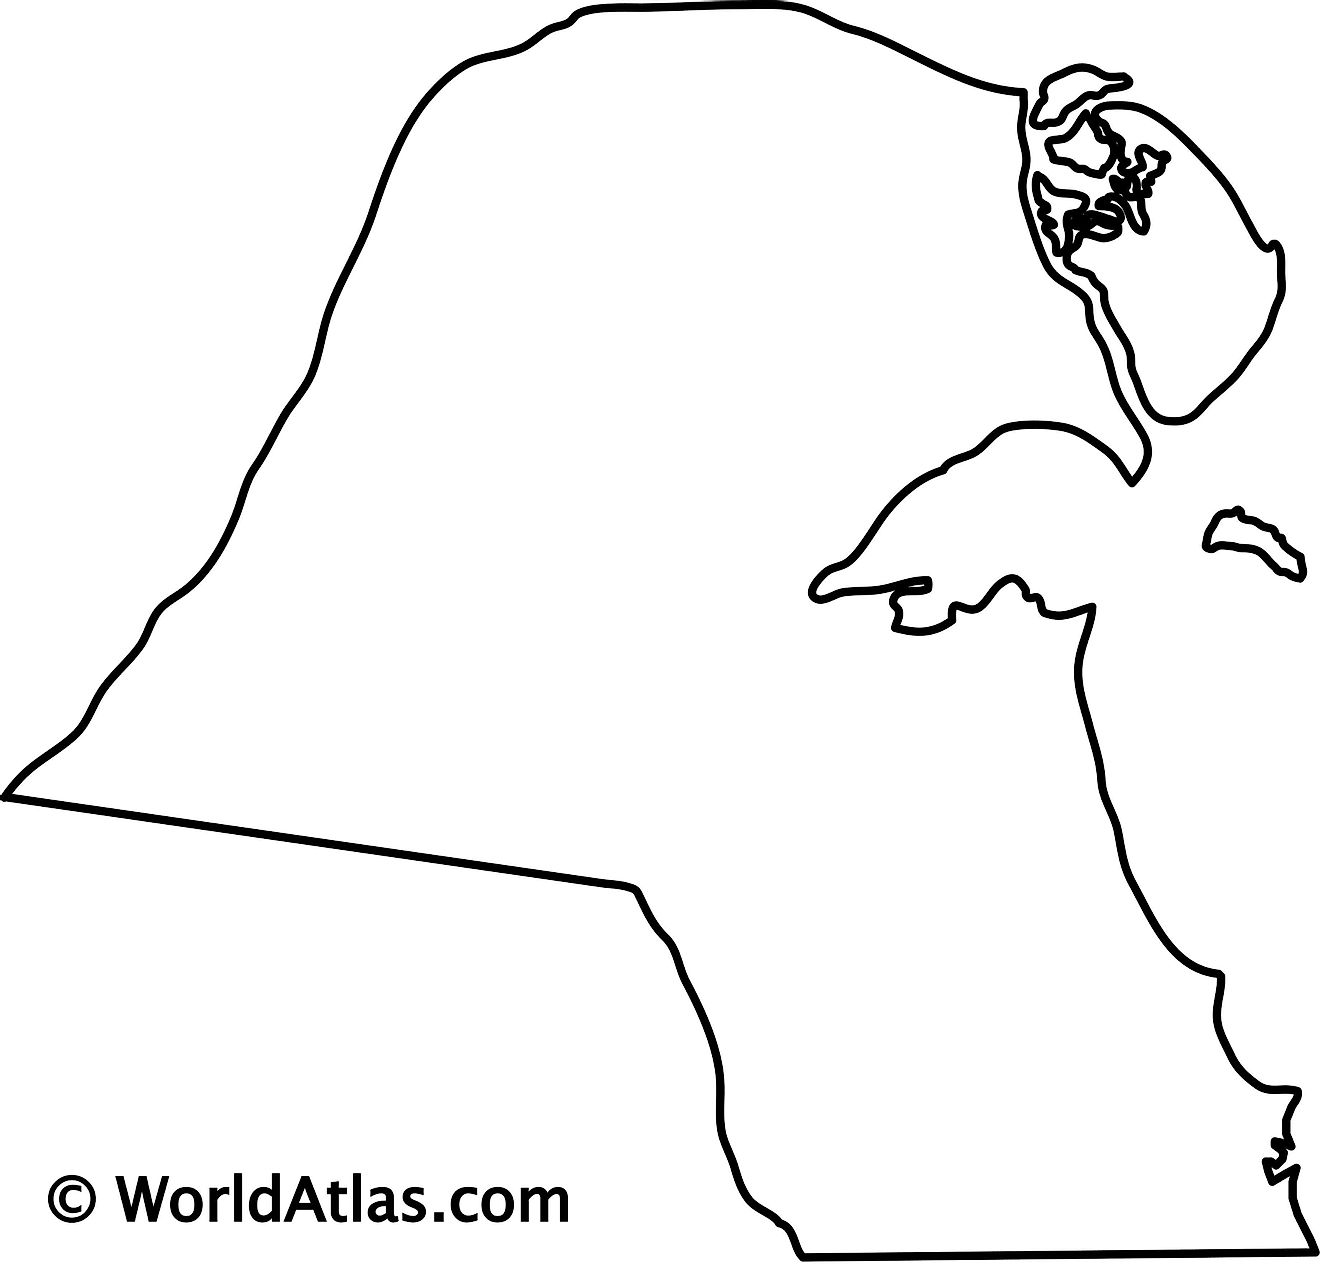 Blank Outline Map of Kuwait